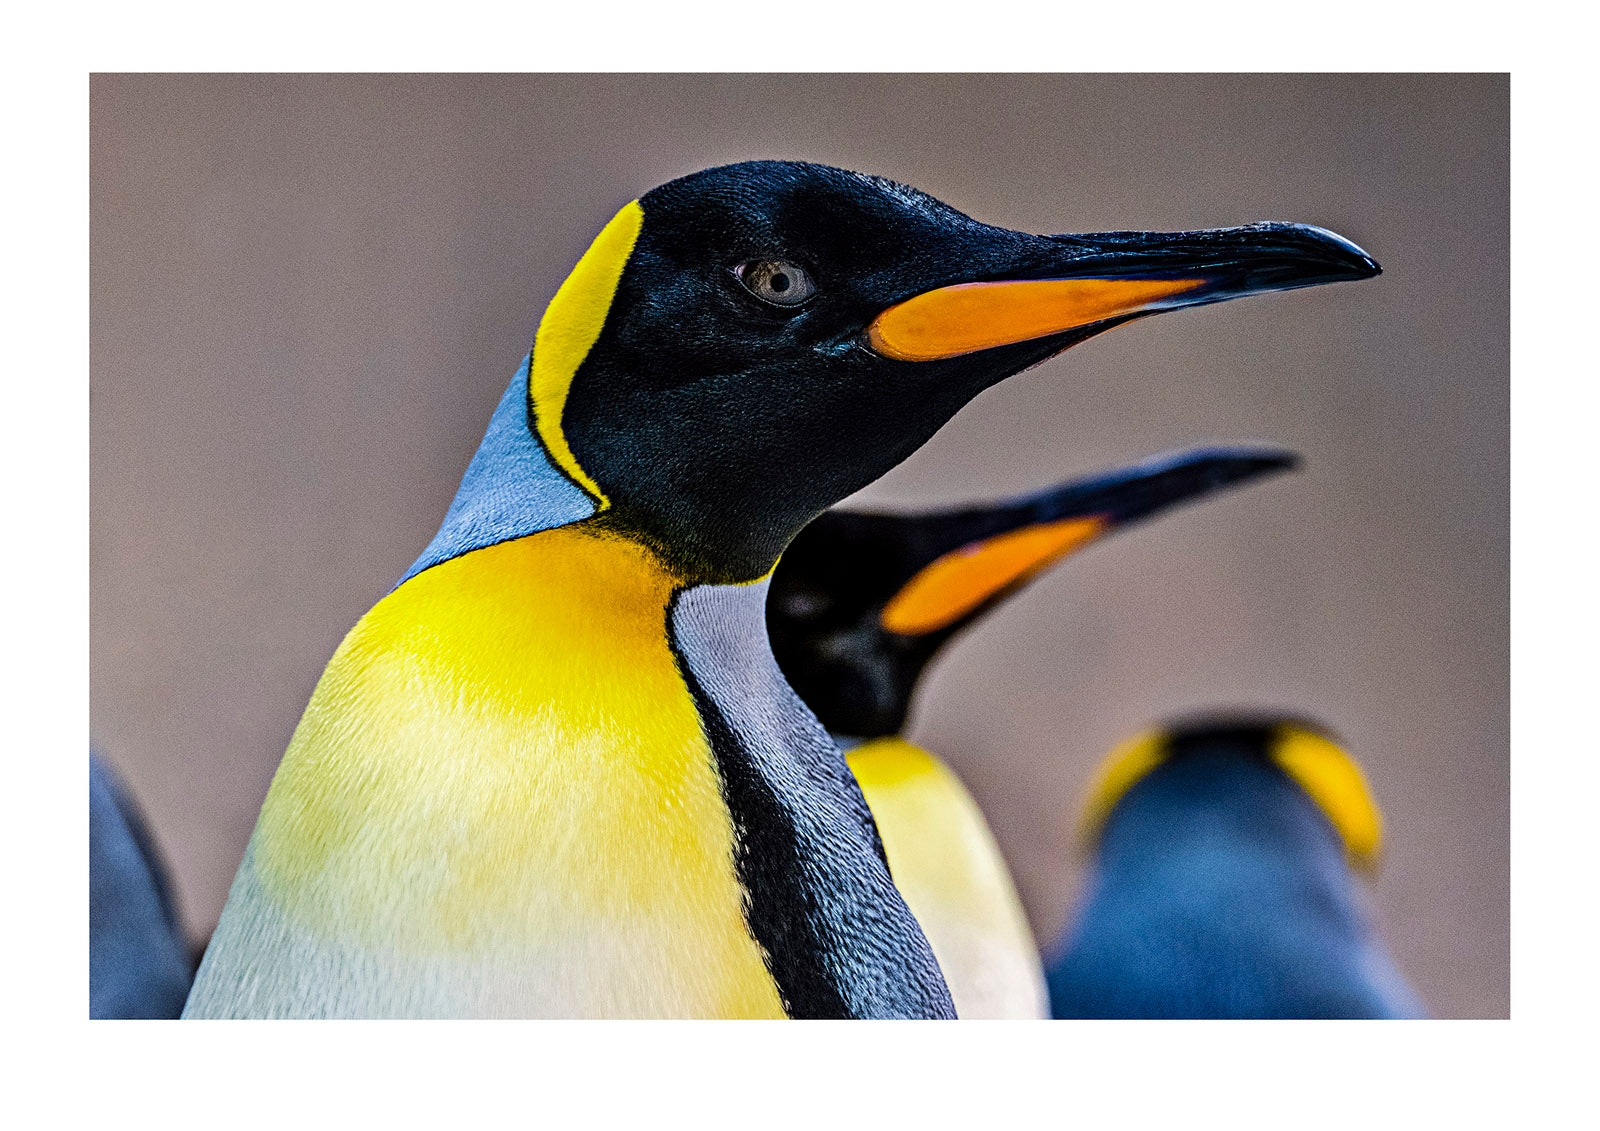 Bright yellow-orange chest feather plumage and mandible markings on a King Penguin. Melbourne, Victoria, Australia.